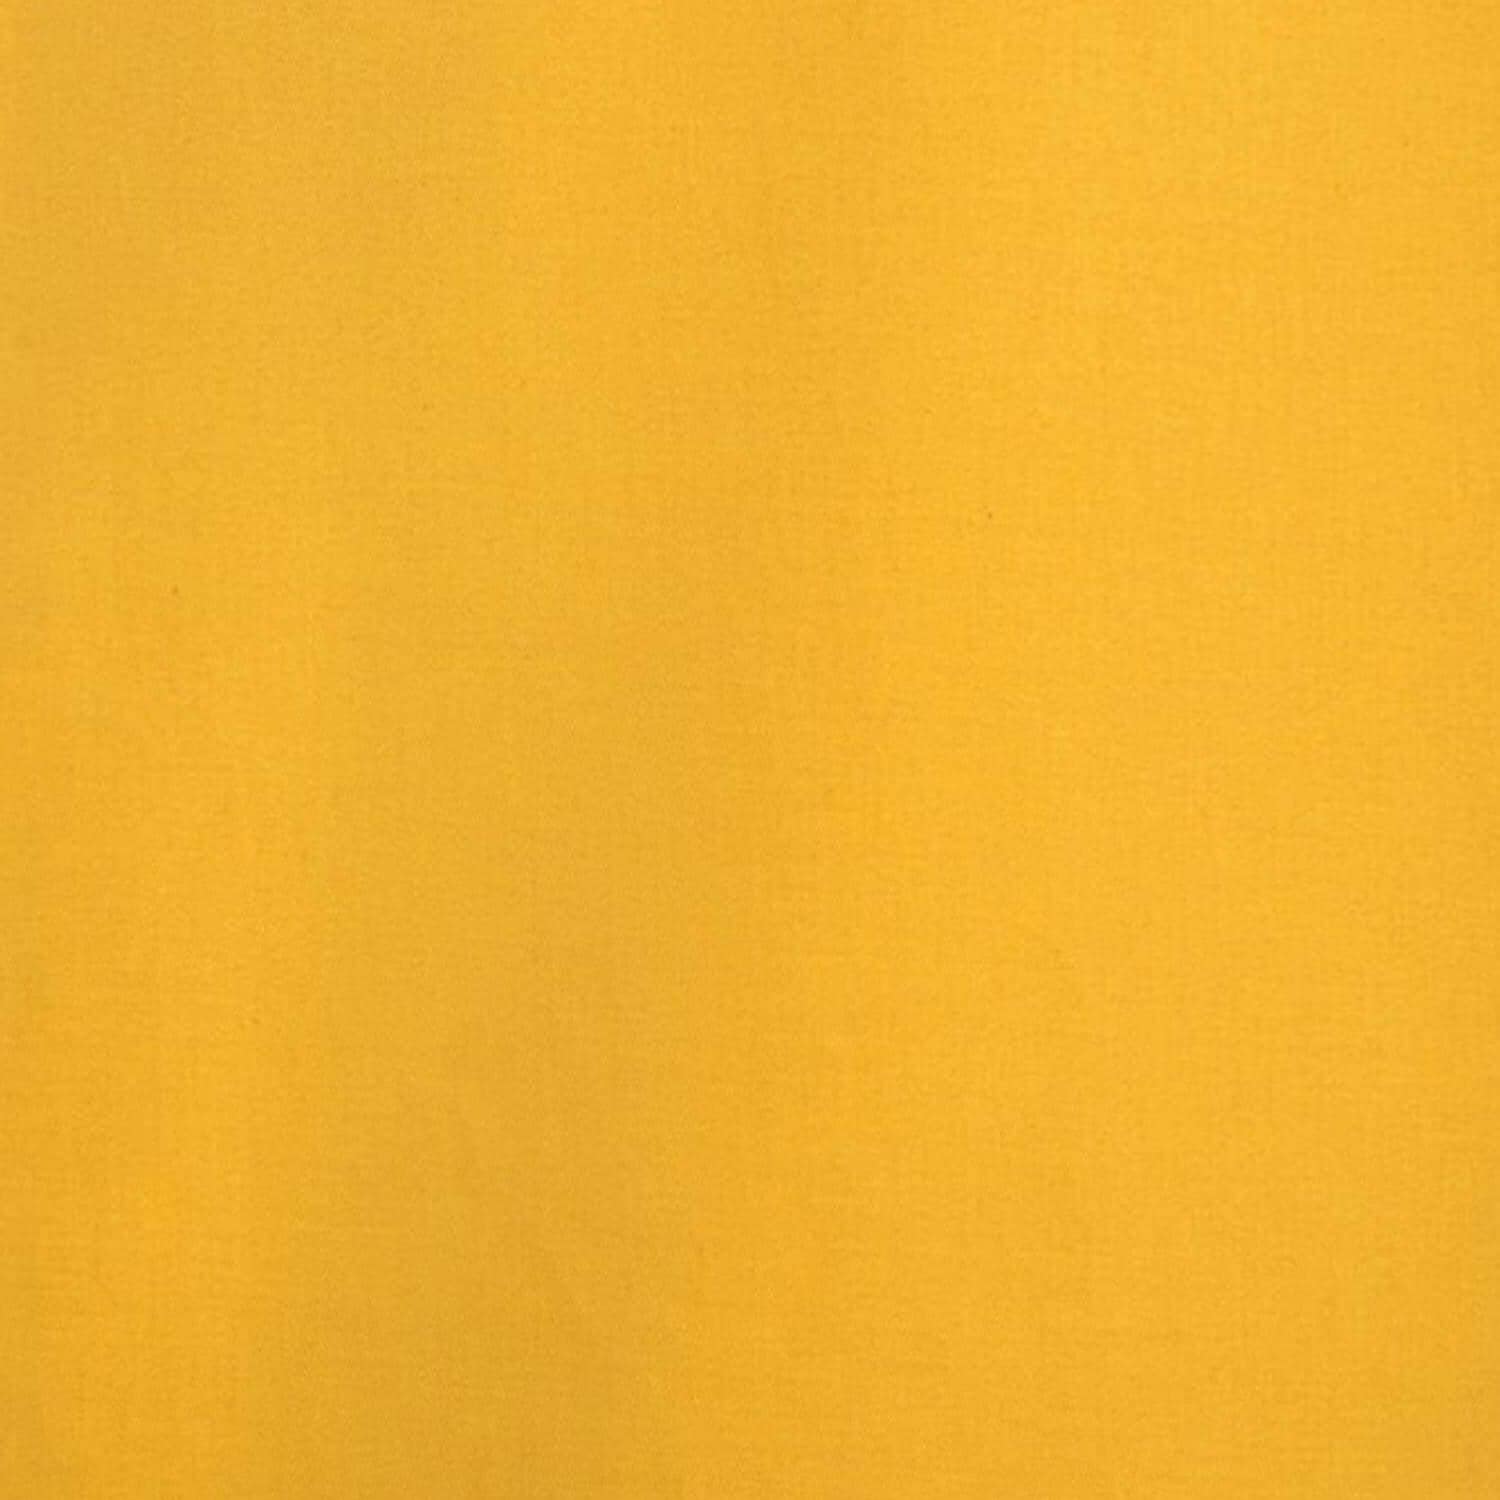 Free photo: Yellow fabric - Fabric, Isolation, Texture - Free Download ...